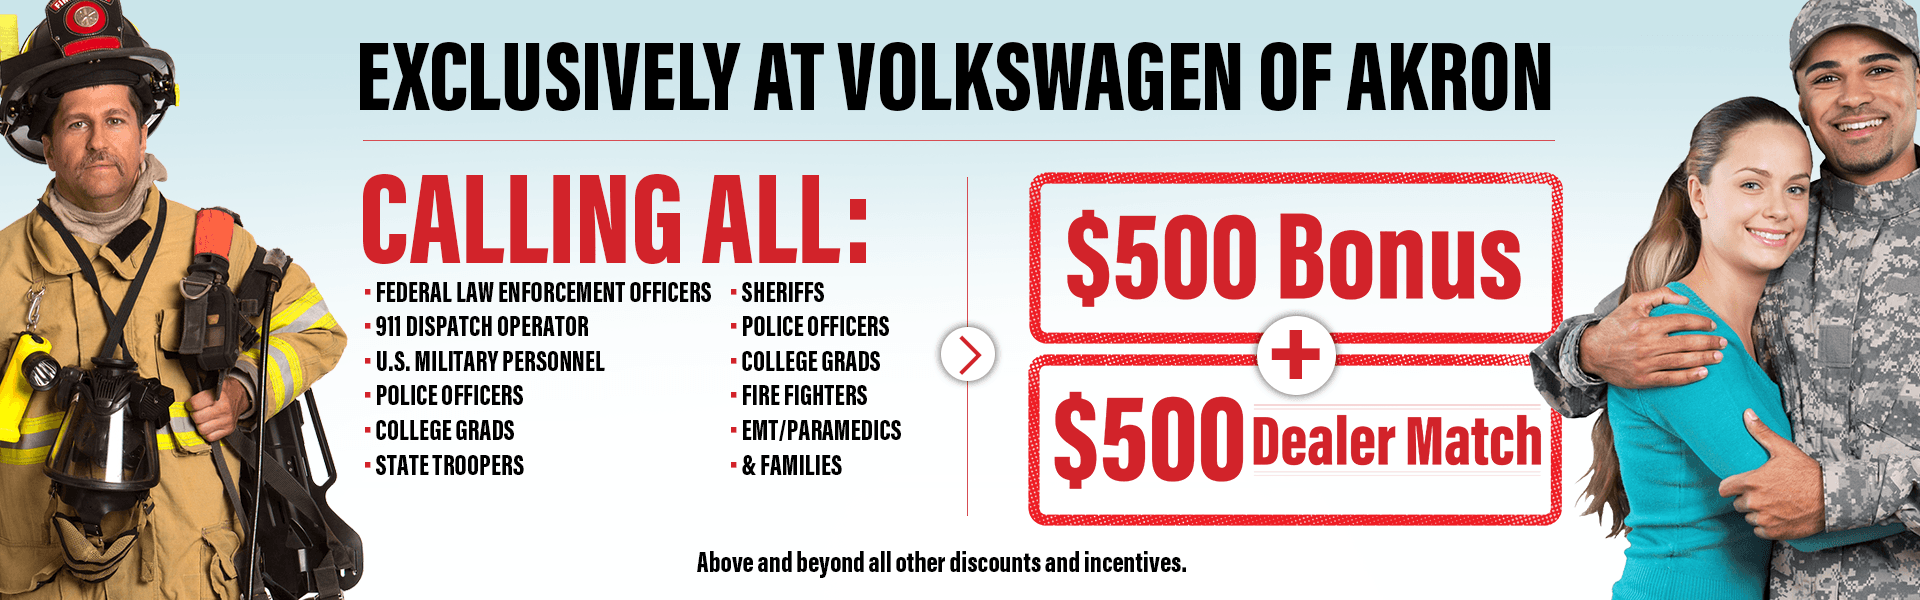 Exclusively at Volkswagen of Akron